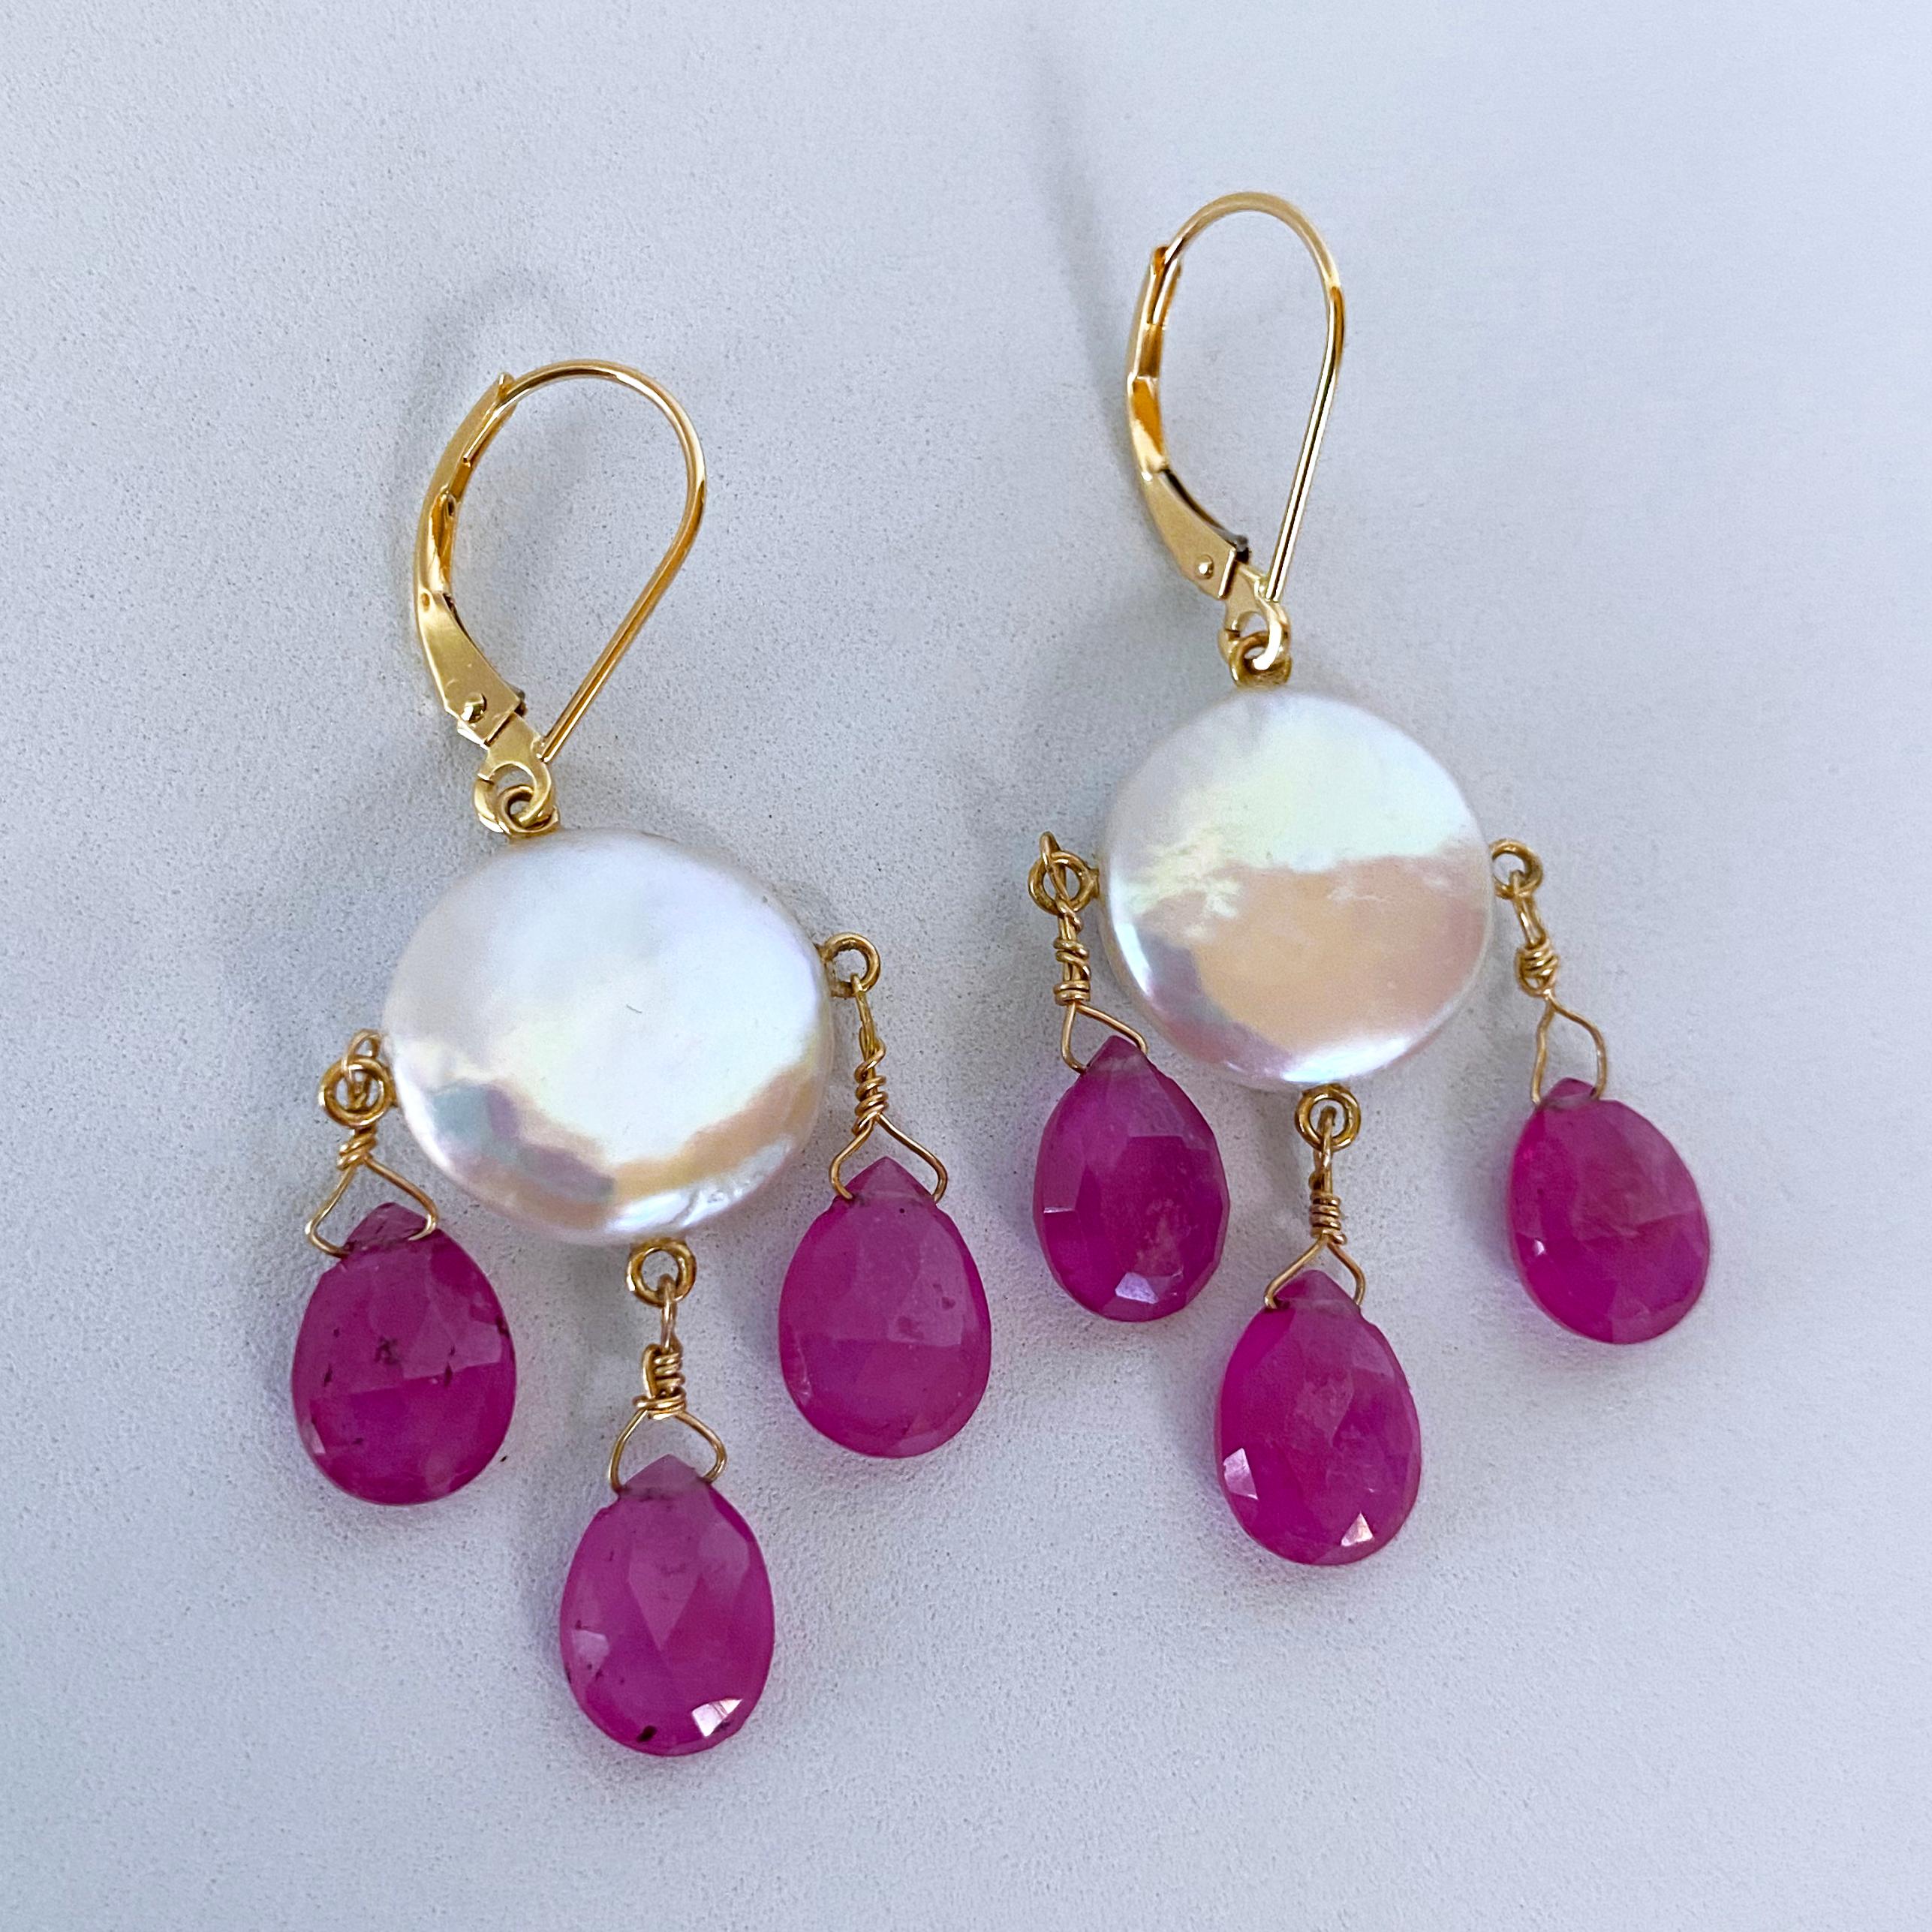 Stunning pair of Earrings by Marina J. This pair is made with all solid 14k Yellow Gold wiring and hooks. A Coin Pearl with a beautiful iridescent luster sits as three vivid Pink Ruby teardrop Briolettes hang from it. The Pink Rubies displays a